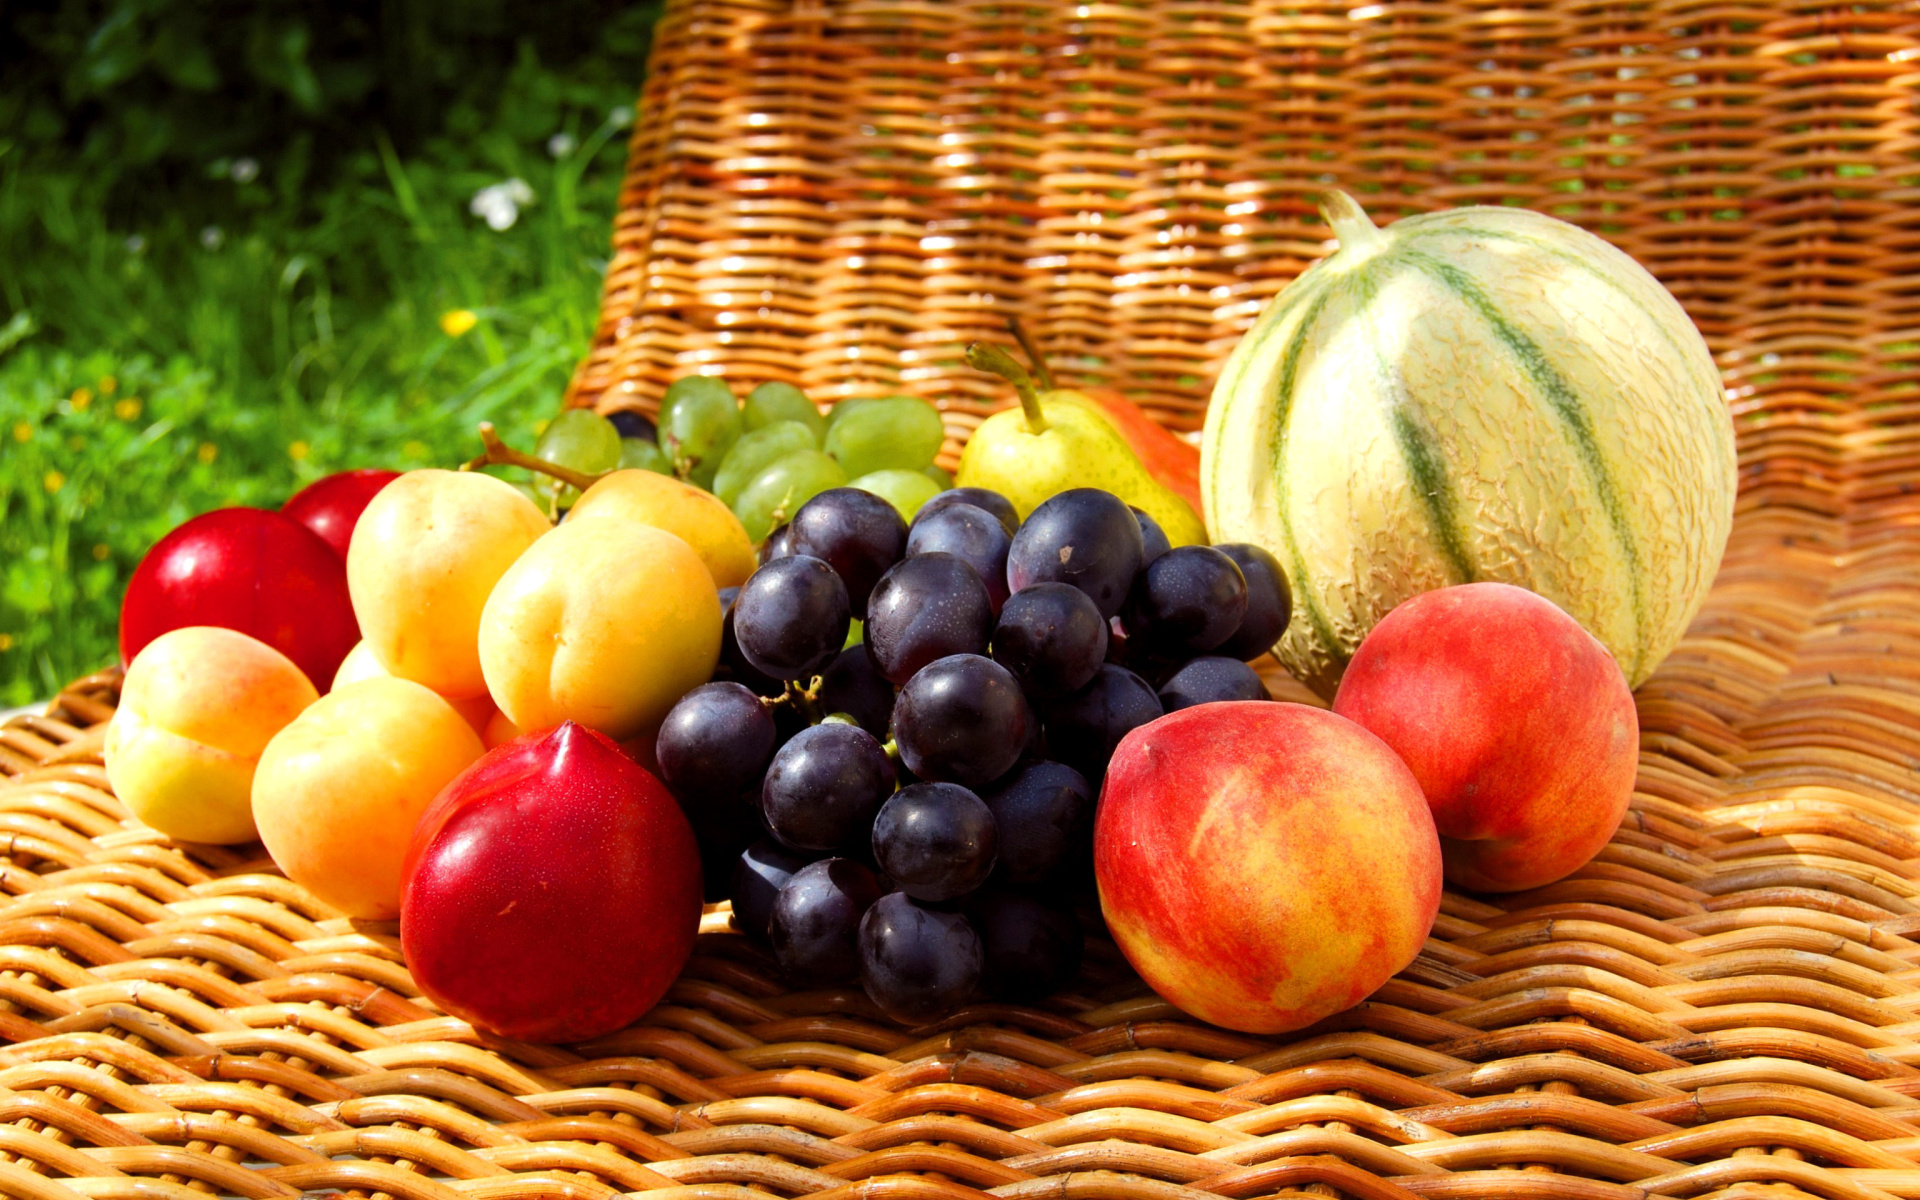 Melons, apricots, peaches, nectarines, grapes, pear screenshot #1 1920x1200